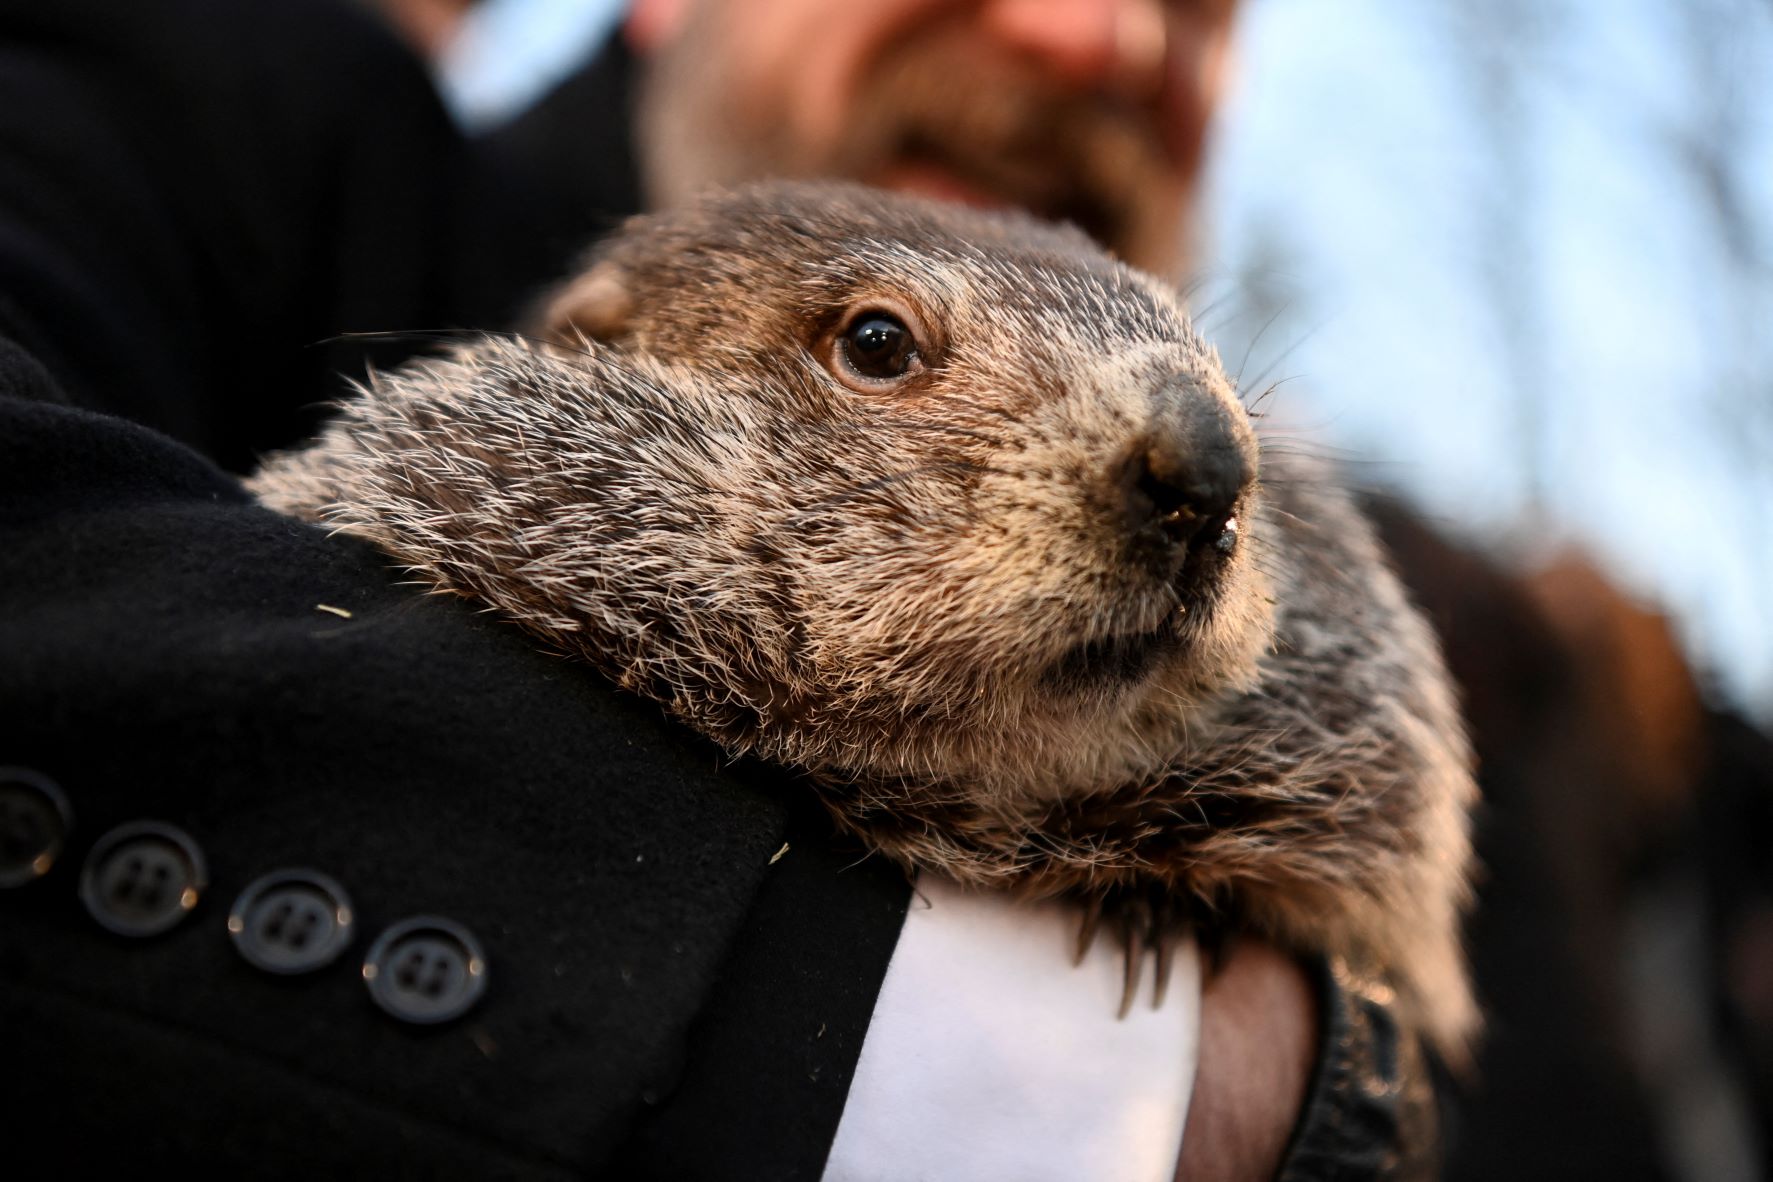 PODCAST – Thursday, February 2: Groundhog Day; New England Brewing Co. Stops By; Connecticut Photographer Going To The Moon